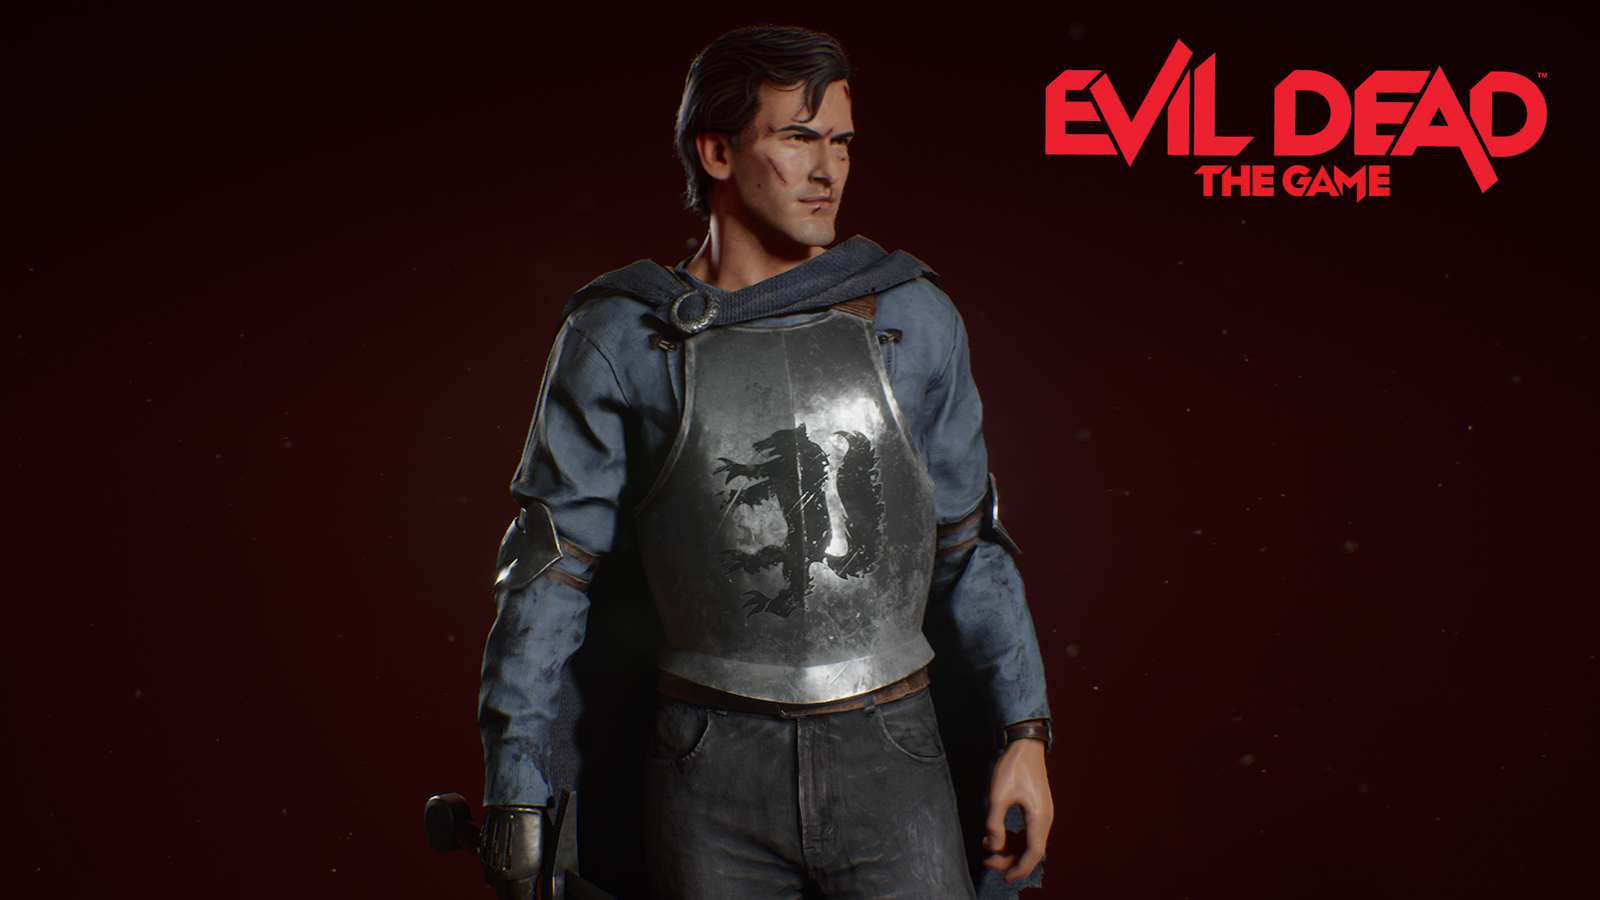 Evil Dead: The Game Gameplay Reveal June 10th - Rely on Horror